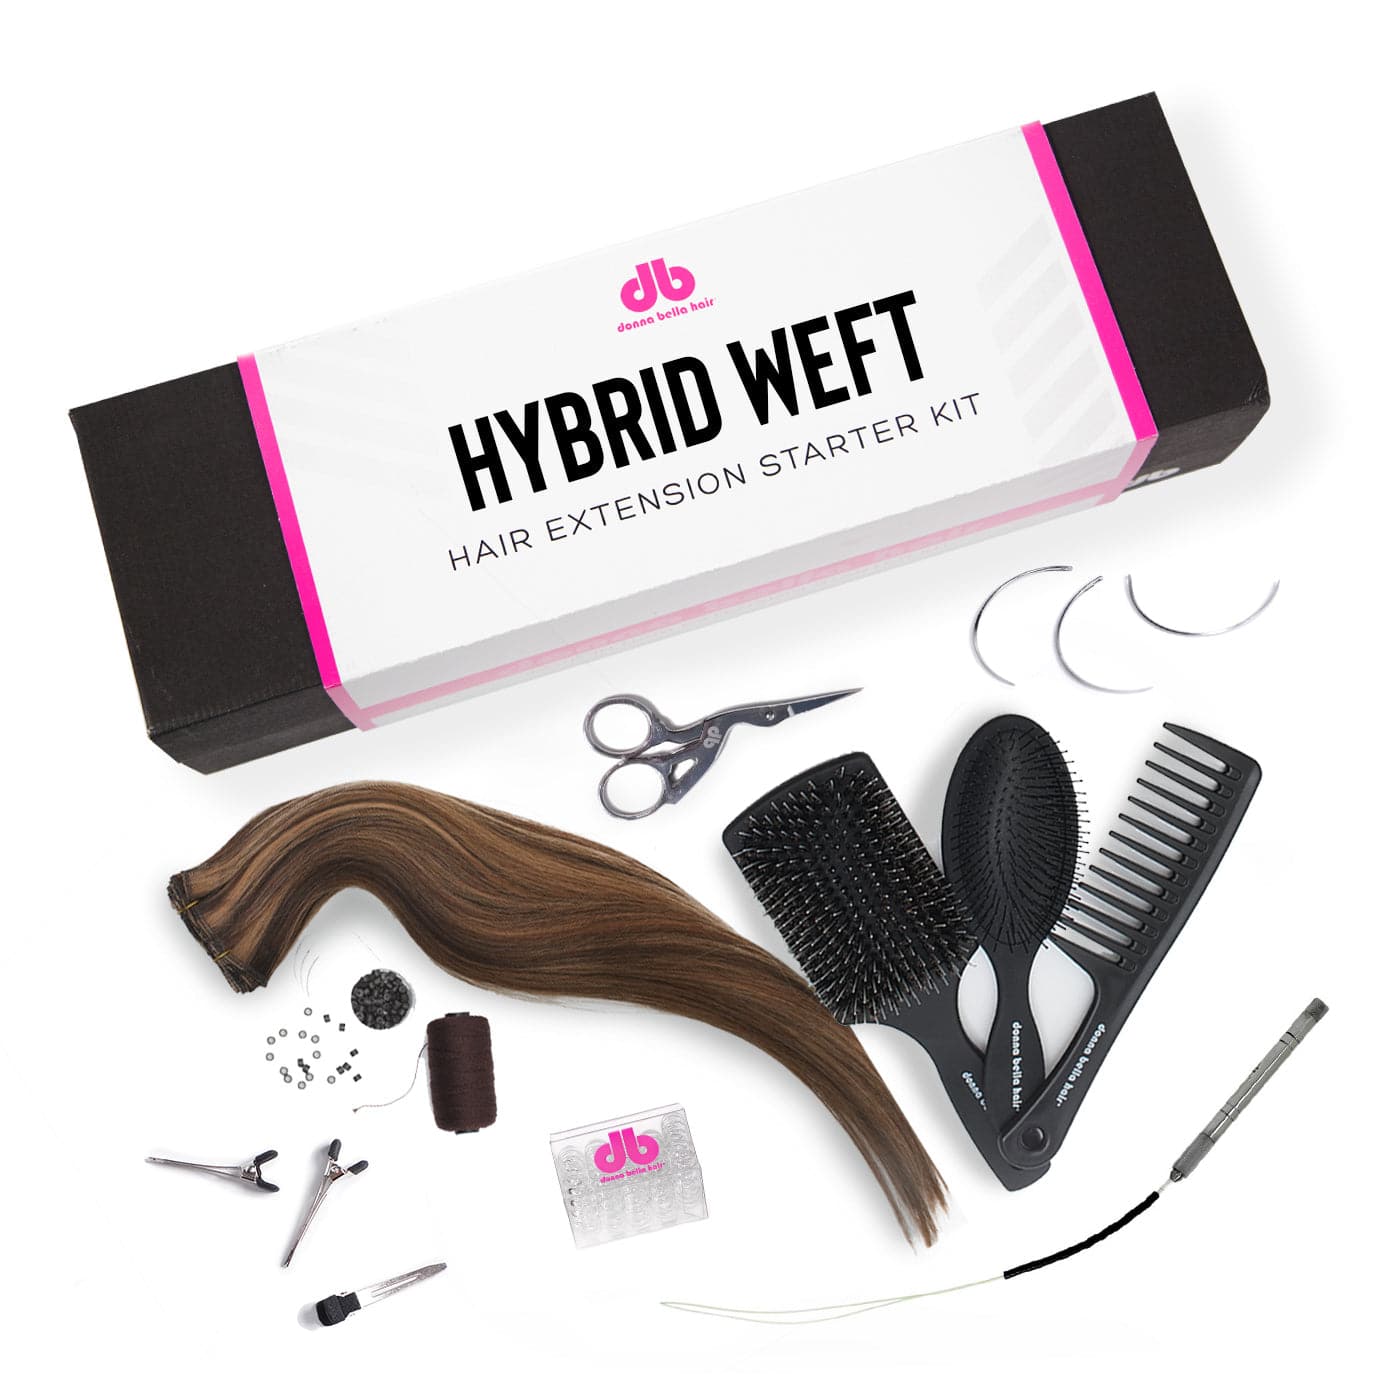 Hybrid Weft - Online Education with Kit - Donna Bella Hair